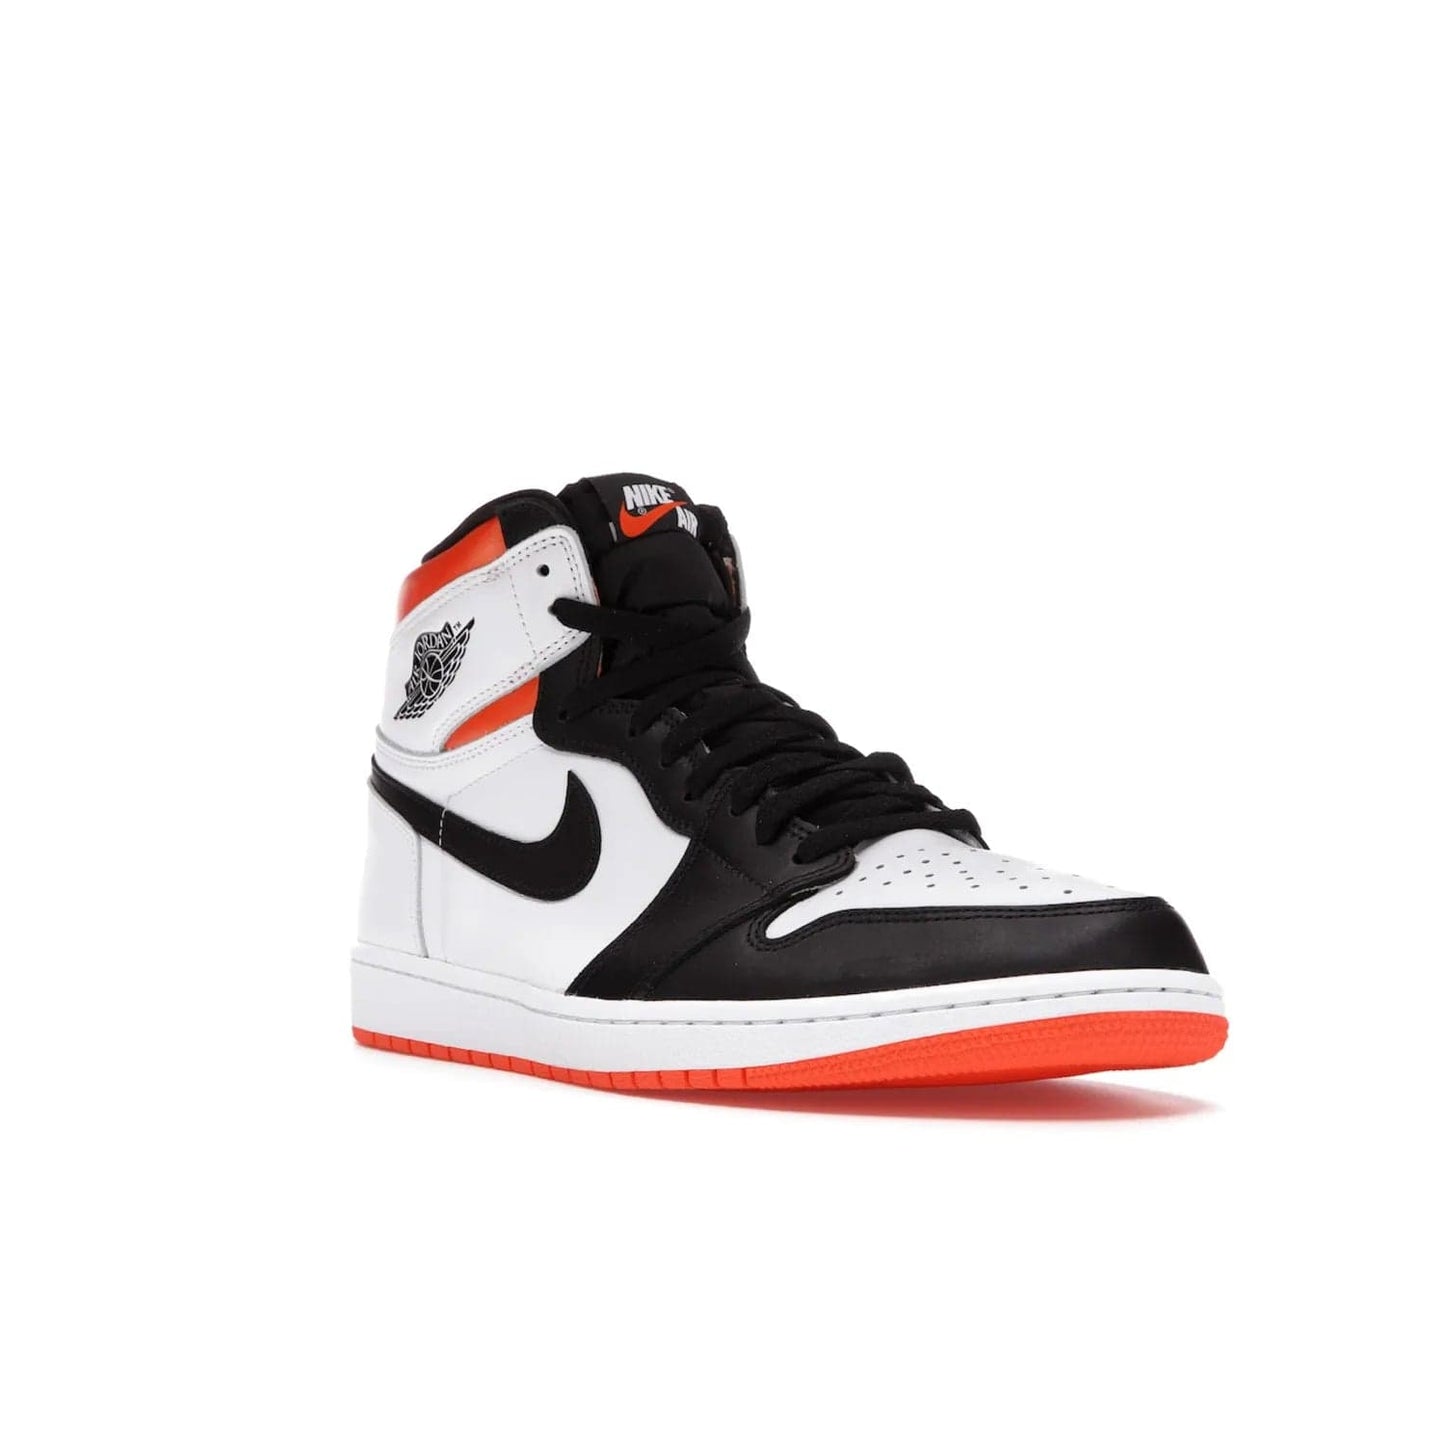 Jordan 1 Retro High Electro Orange - Image 6 - Only at www.BallersClubKickz.com - This Air Jordan 1 Retro High Electro Orange features a white leather upper with black overlays and vibrant Hyper Orange ankle wrap. Turn heads with this iconic design of woven tongue label and sole. Get yours today and add some serious style to your rotation.